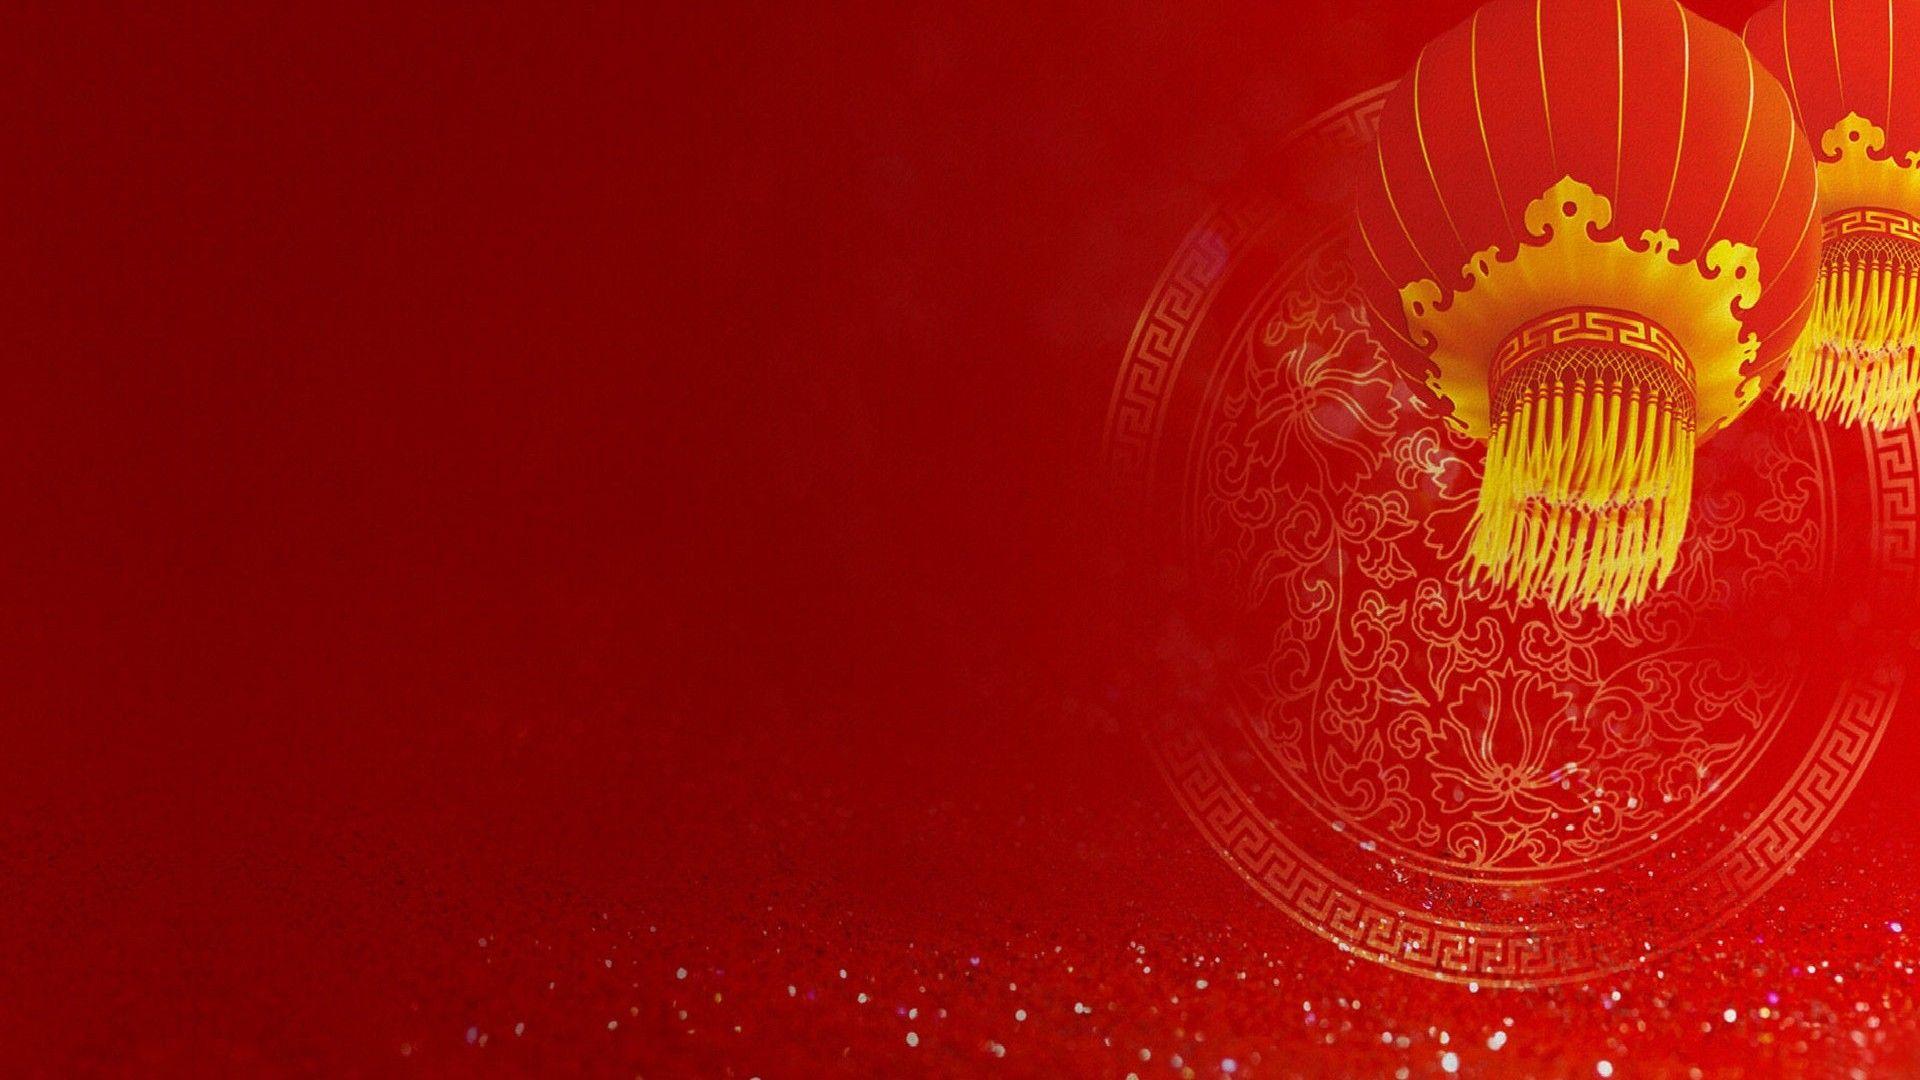 Chinese New Year Background for Free in Red and Gold Color in HD. ตรุษจีน, ฮวงจุ้ย, วอลเปเปอร์